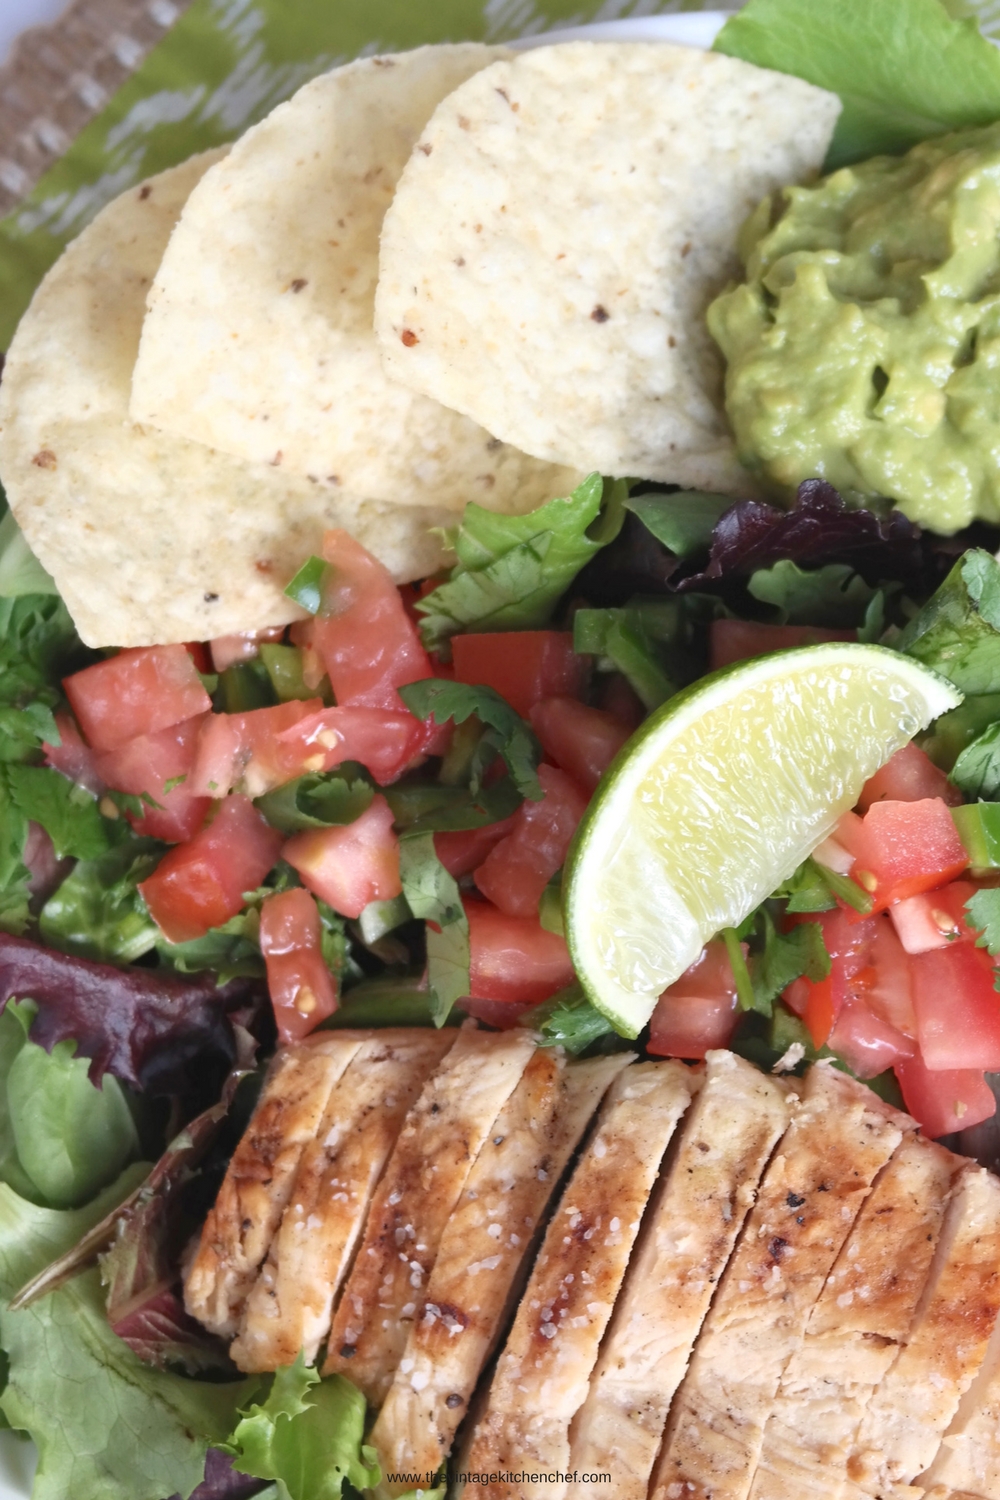 Margarita Chicken Salad is fresh and a bit fiery! Chicken breast marinated in margarita mix, guacamole, and a spicy Pico de gallo atop a blend of greens